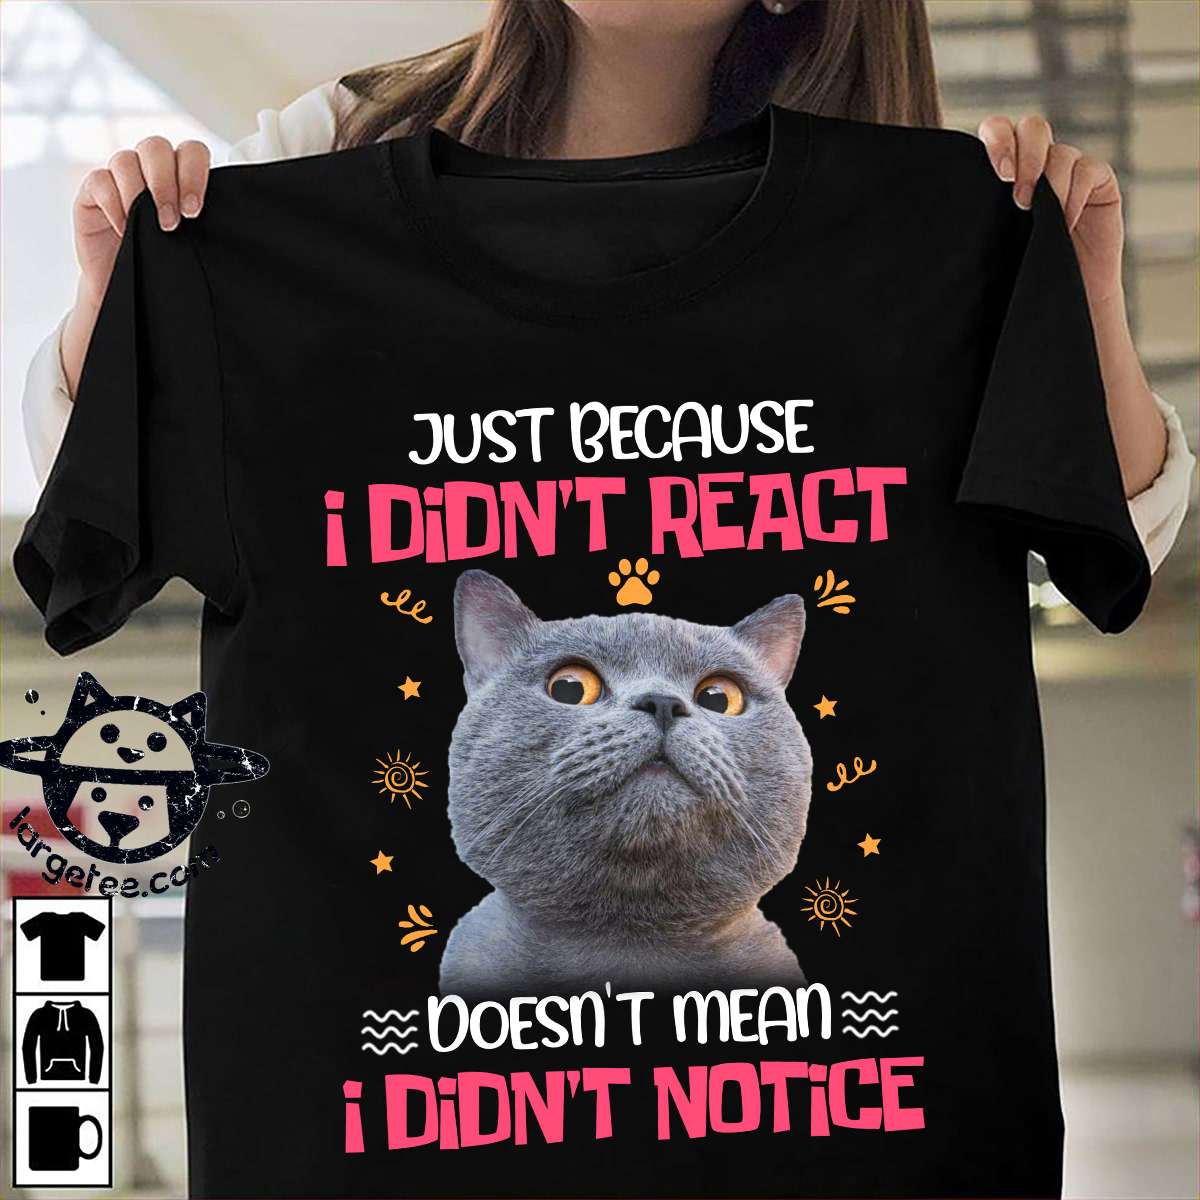 Just because I didn't react doesn't mean I didn't notice - Cranky cat, cat lover T-shirt